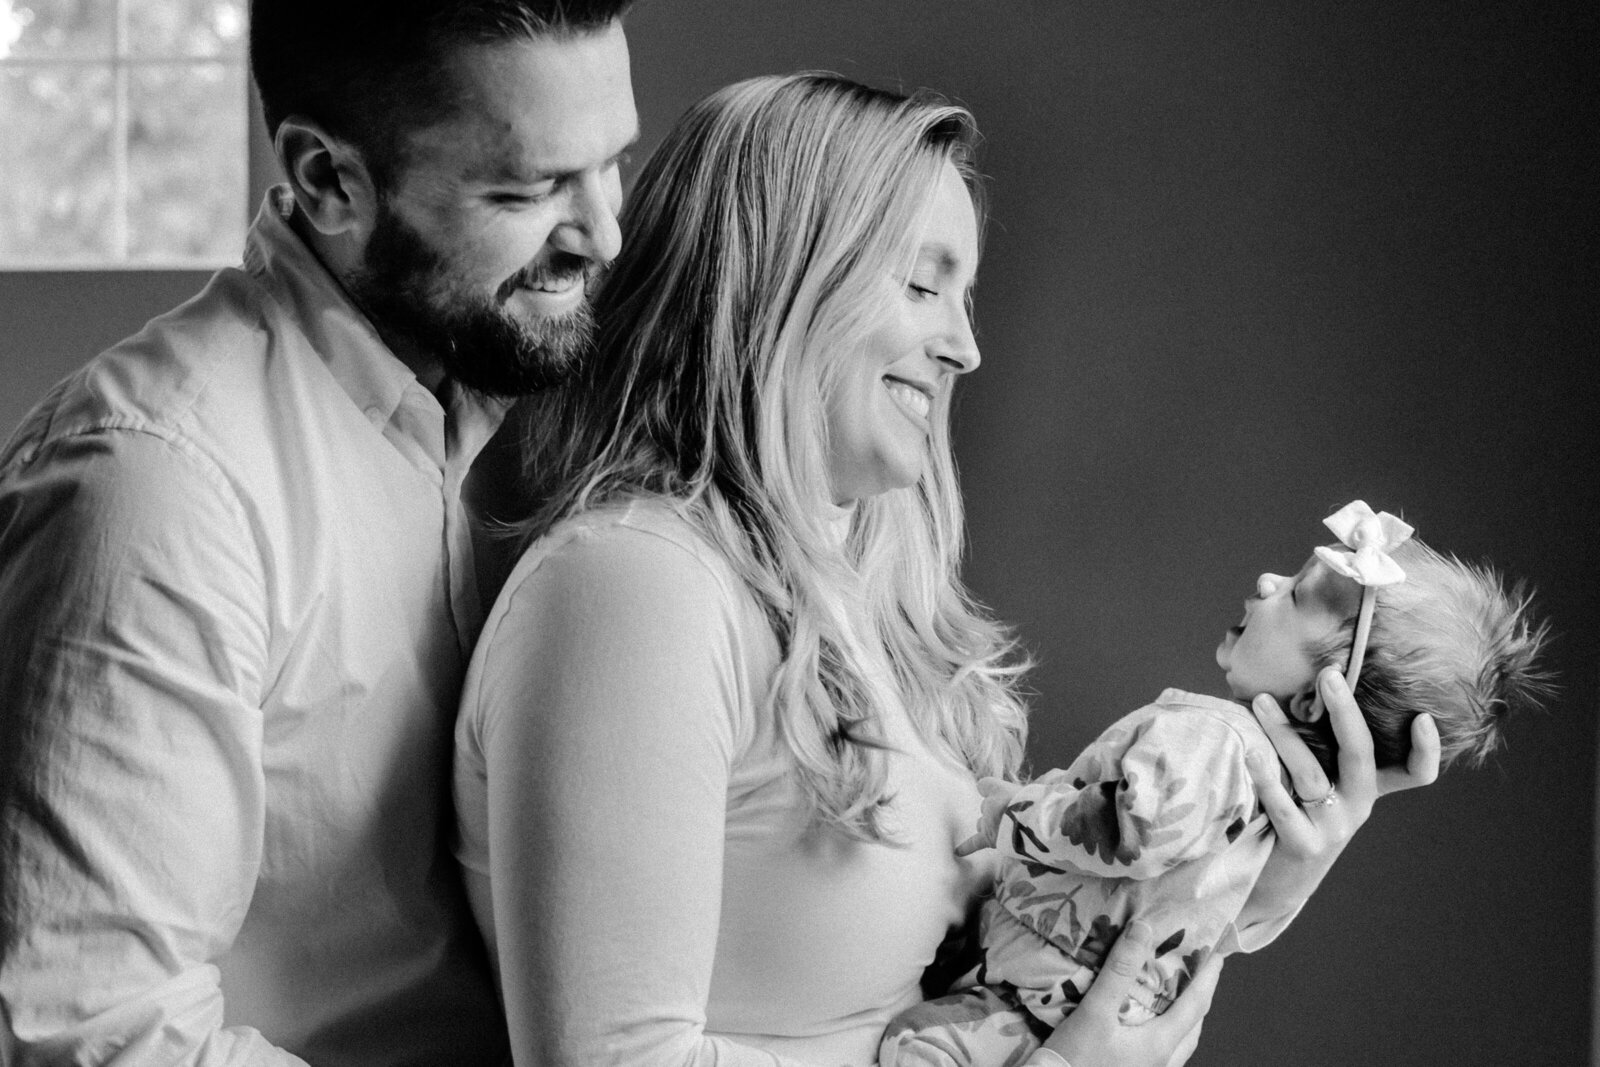 Mom and dad smile down at newborn daughter wearing big bow during newborn session in Tampa